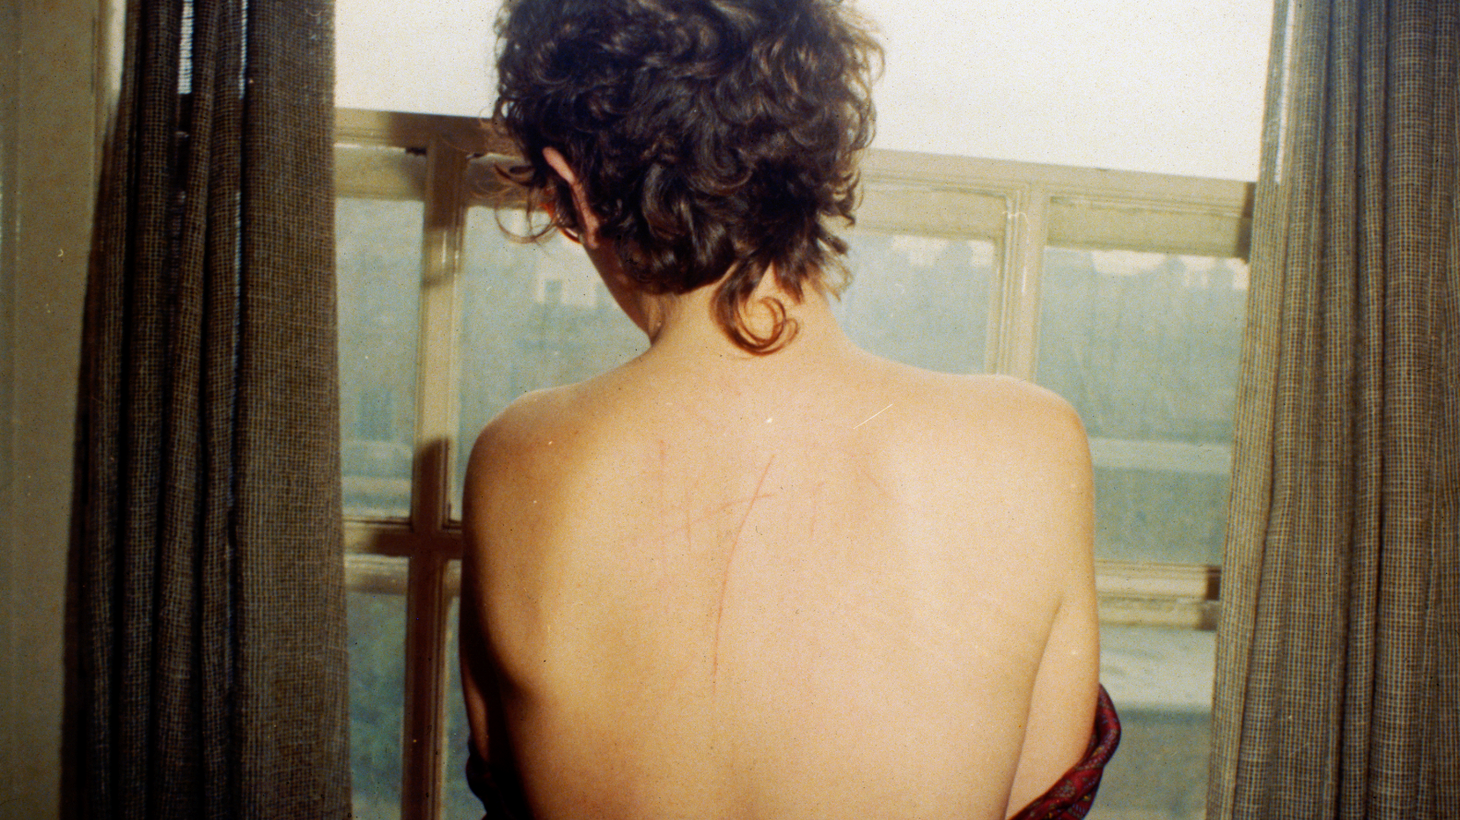 Nan Goldin’s self-portrait shows her scratched back after sex, London 1978. “[Nan Goldin] took the photographs both as a way to remind herself not to go back to the relationship, but that also people would see those photographs and be able to talk about domestic abuse. Society is very successful at placing shame … on people who are struggling, and yet the shame actually belongs someplace else,” says director Laura Poitras.